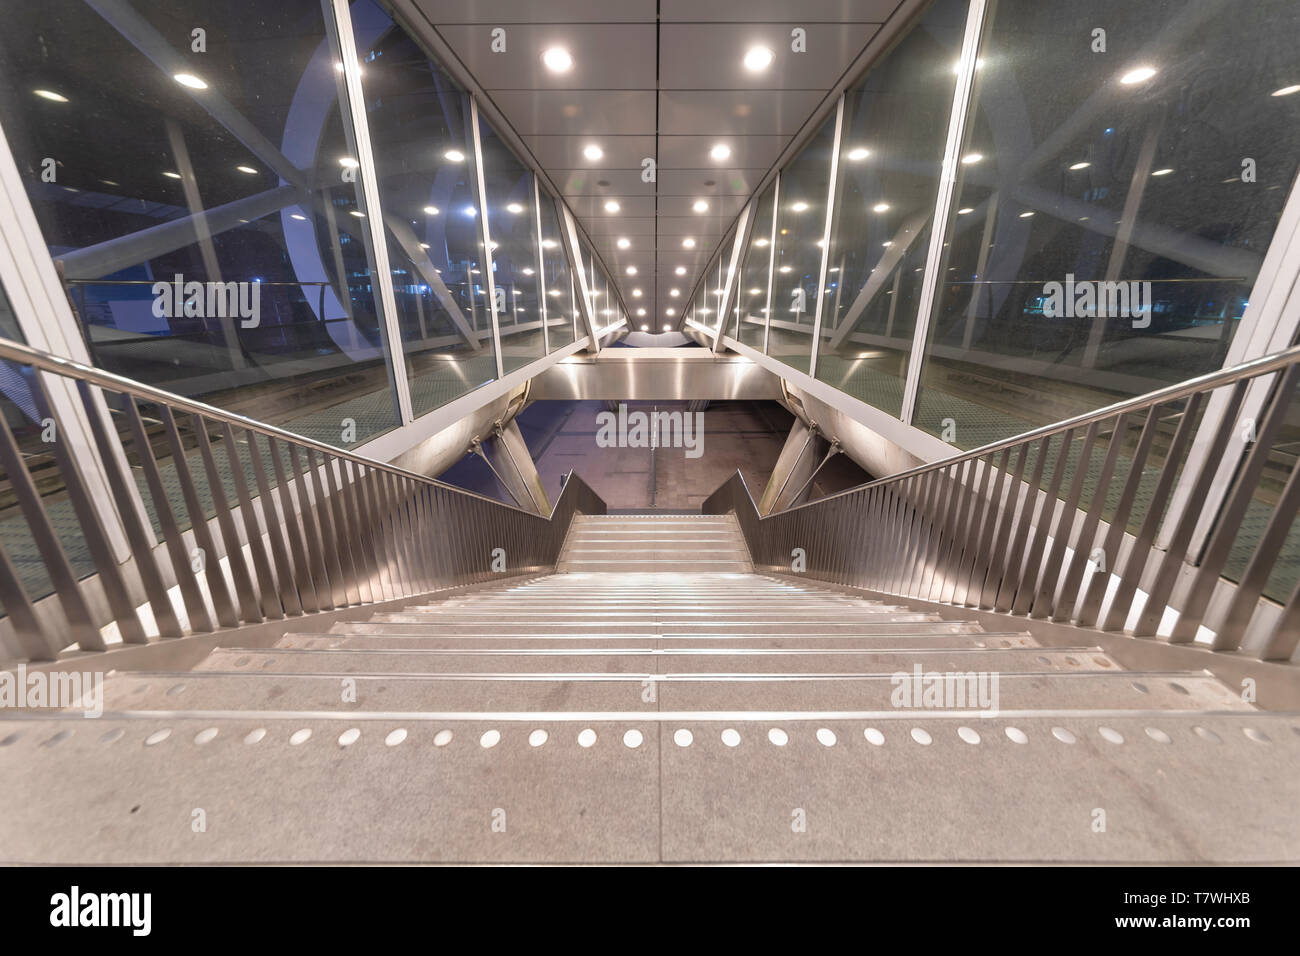 Beatrixkwartier (Beatrix district in Dutch) entrance East escalator getting out from tramway station in The Hague at night, Netherlands Stock Photo